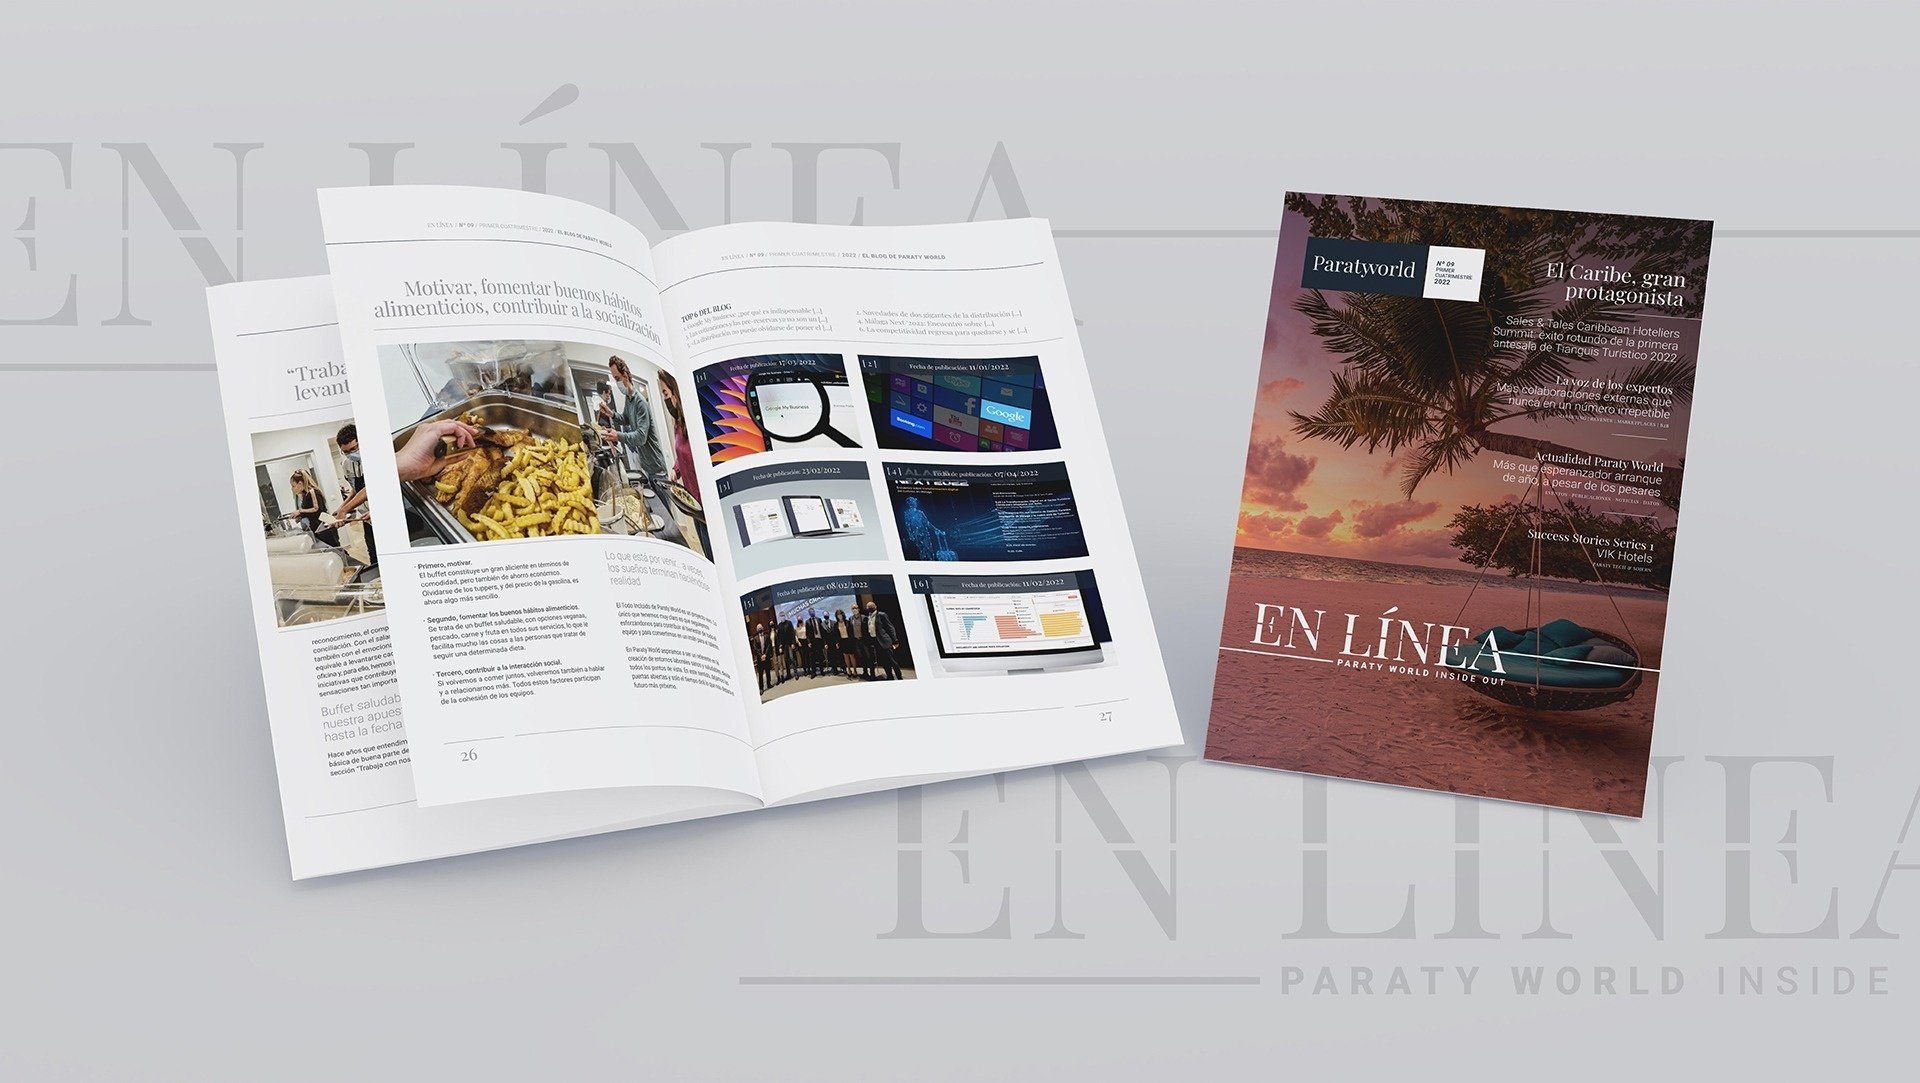 The Caribbean, protagonist of No. 9 of En Linea, our digital magazine